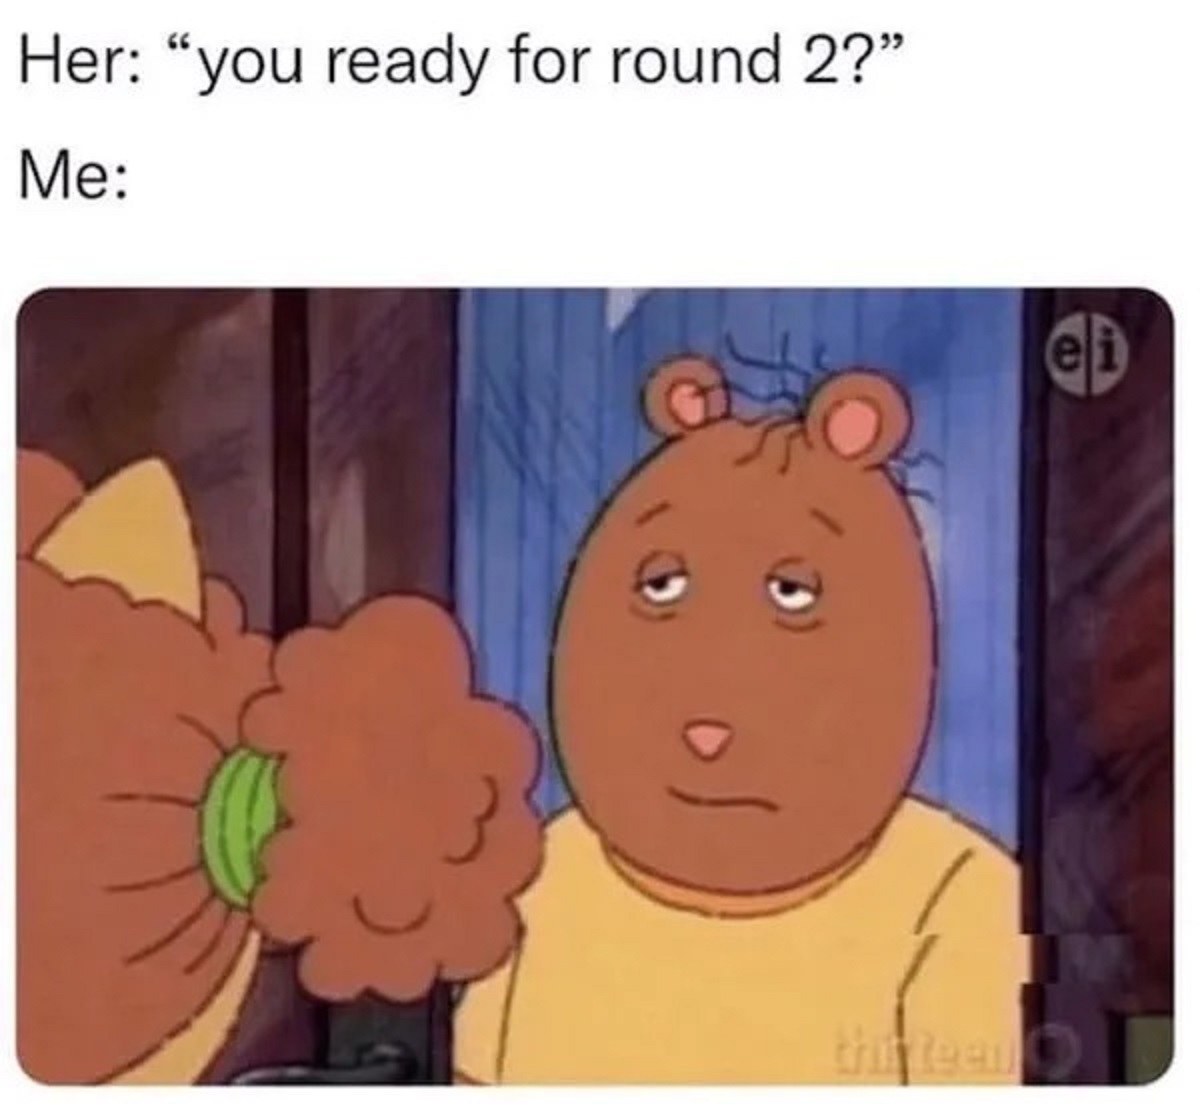 33 Dirty Late-Night Pics and Memes For the Sinners With a Sense of Humor 